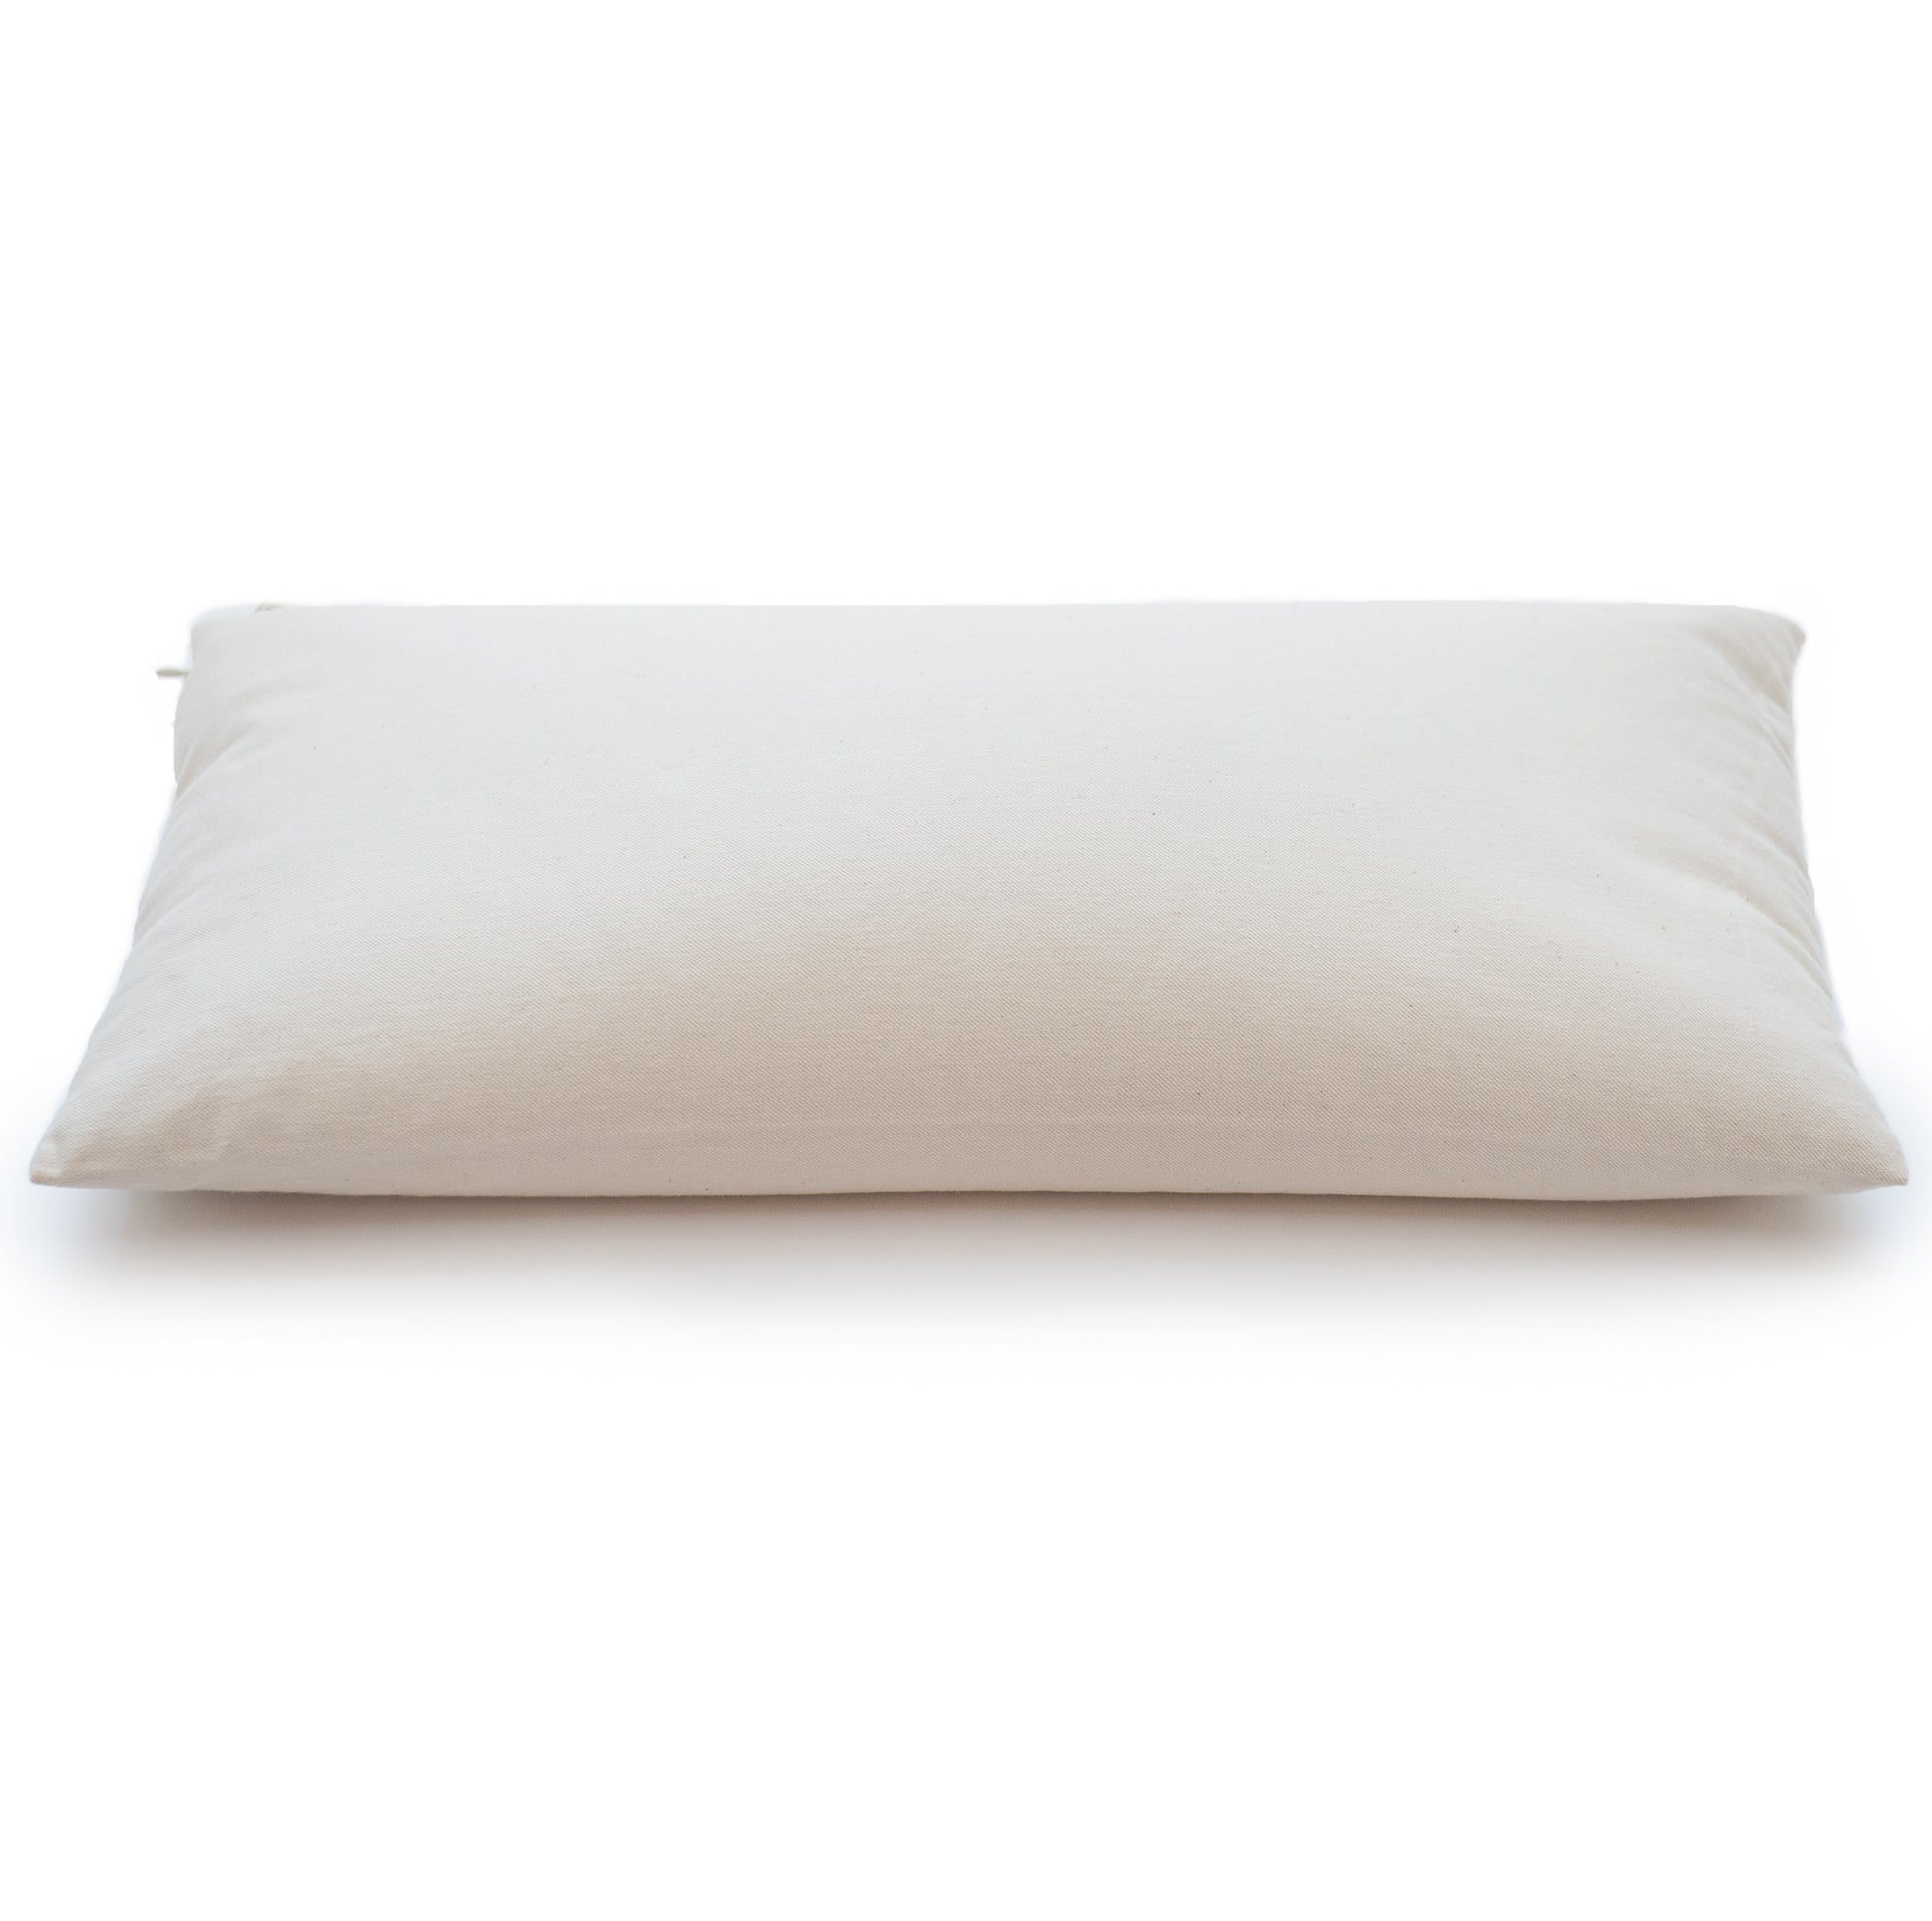 Introducing the Comfy Curve: our newest buckwheat hull pillow – ComfyComfy